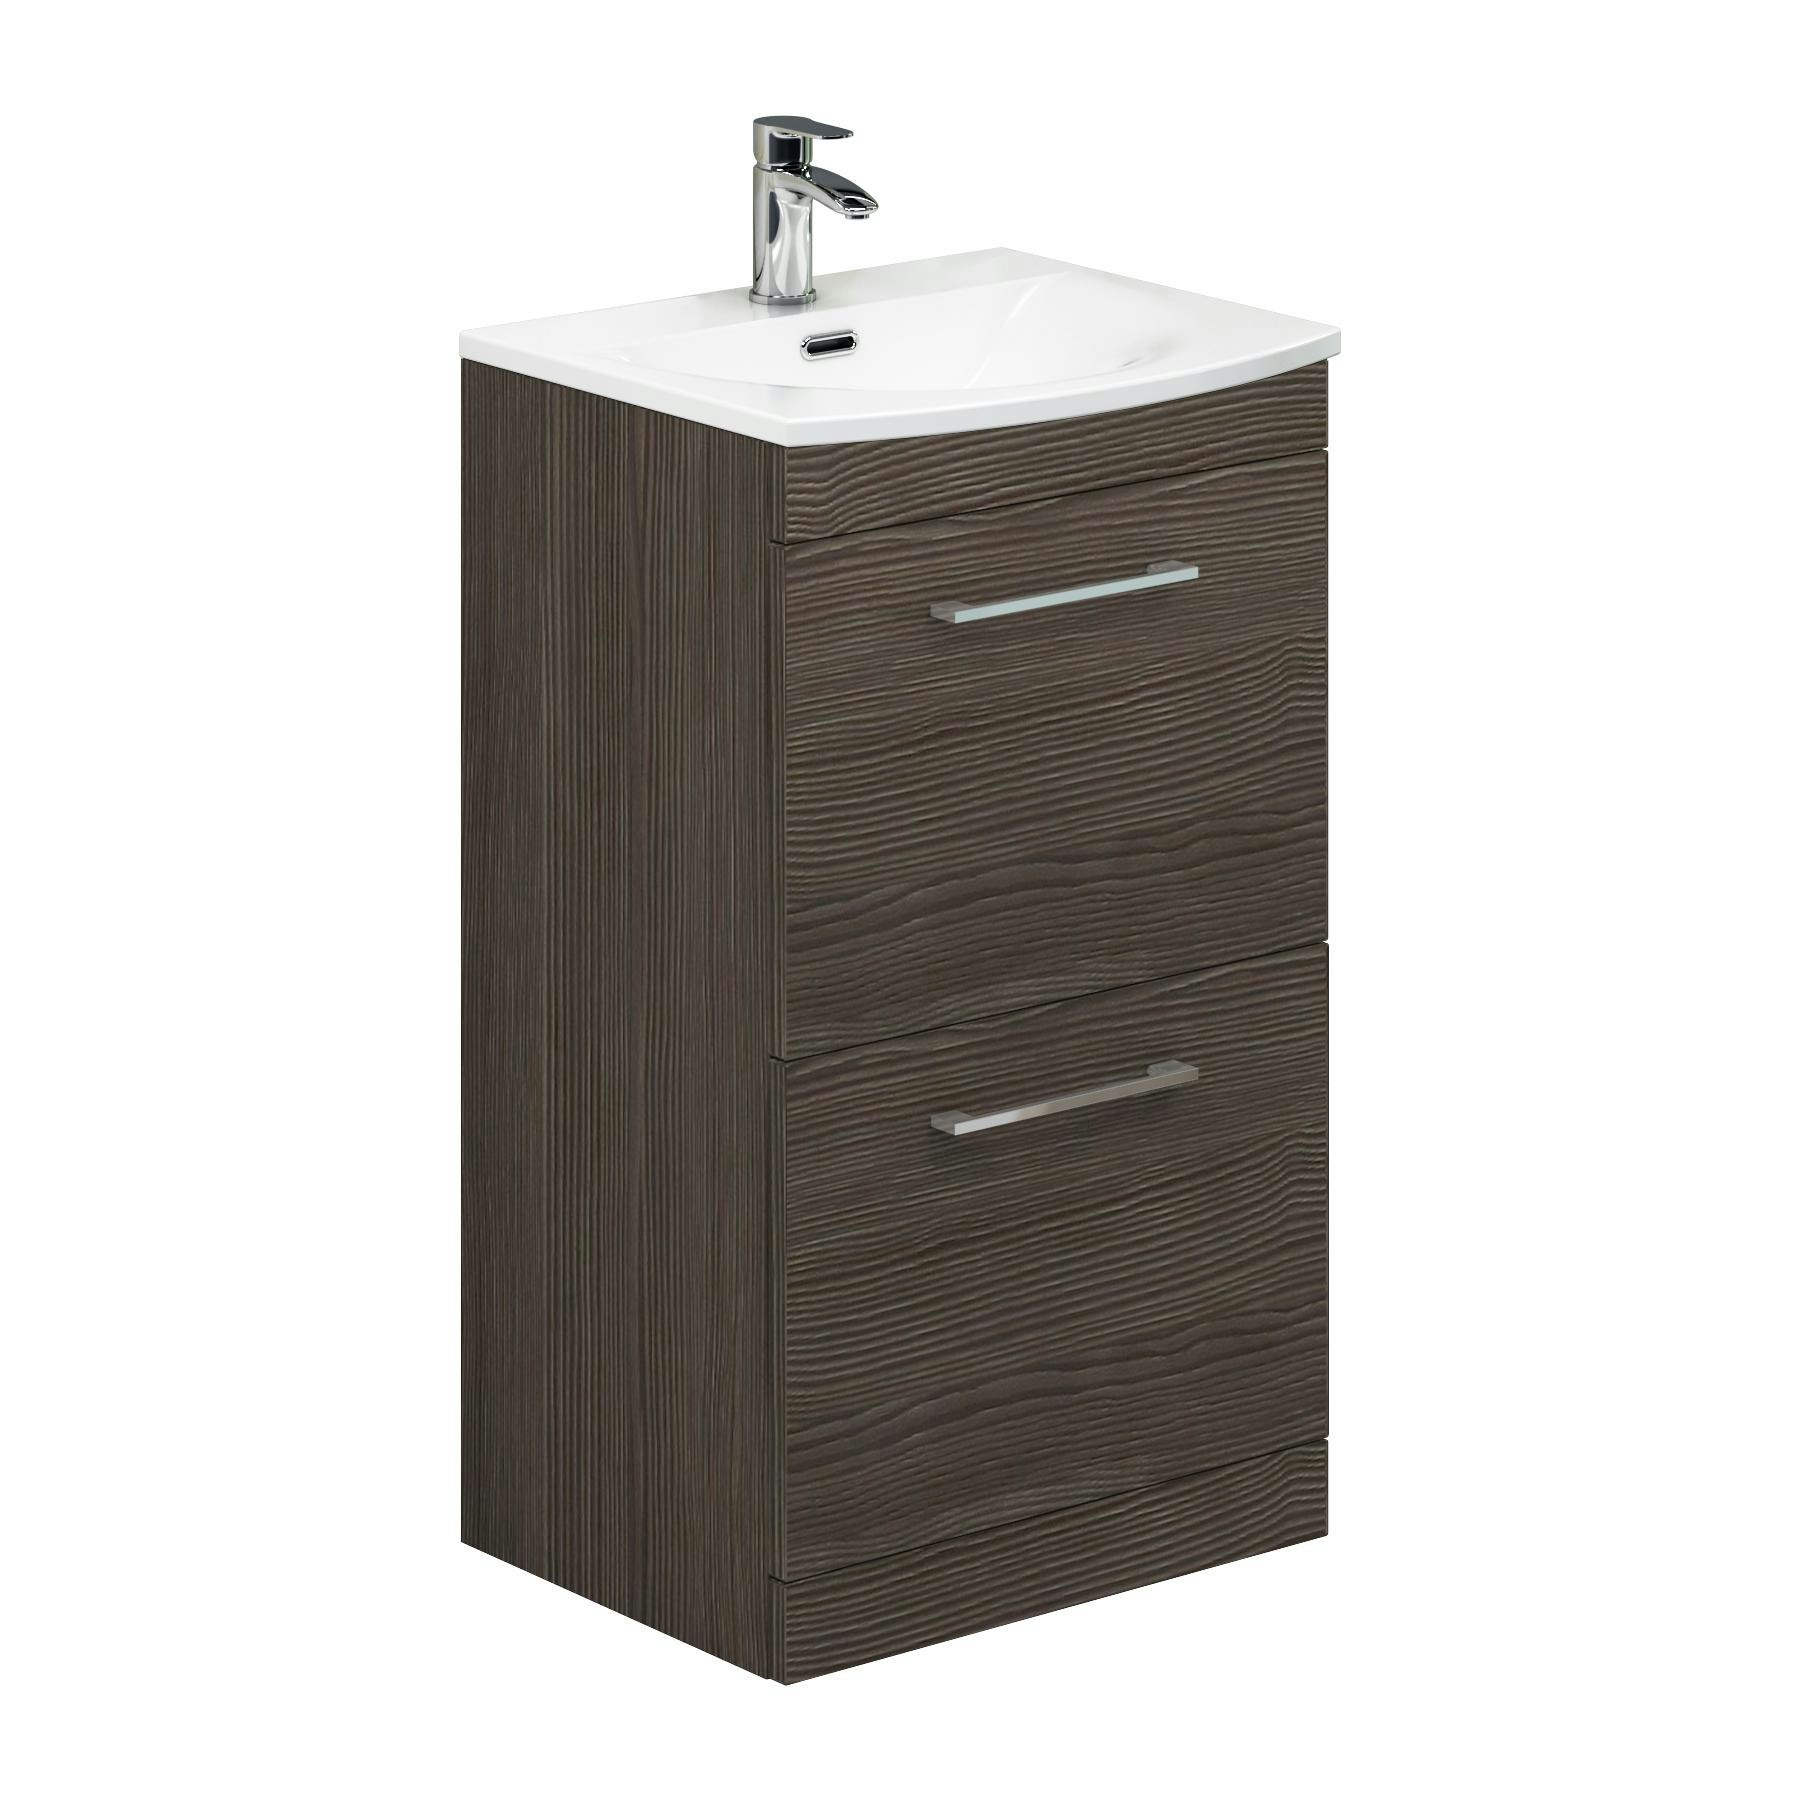 Marbella 500mm Floor Standing Vanity Unit with 2 Drawer Grey Elm Cabinet & Curved Basin